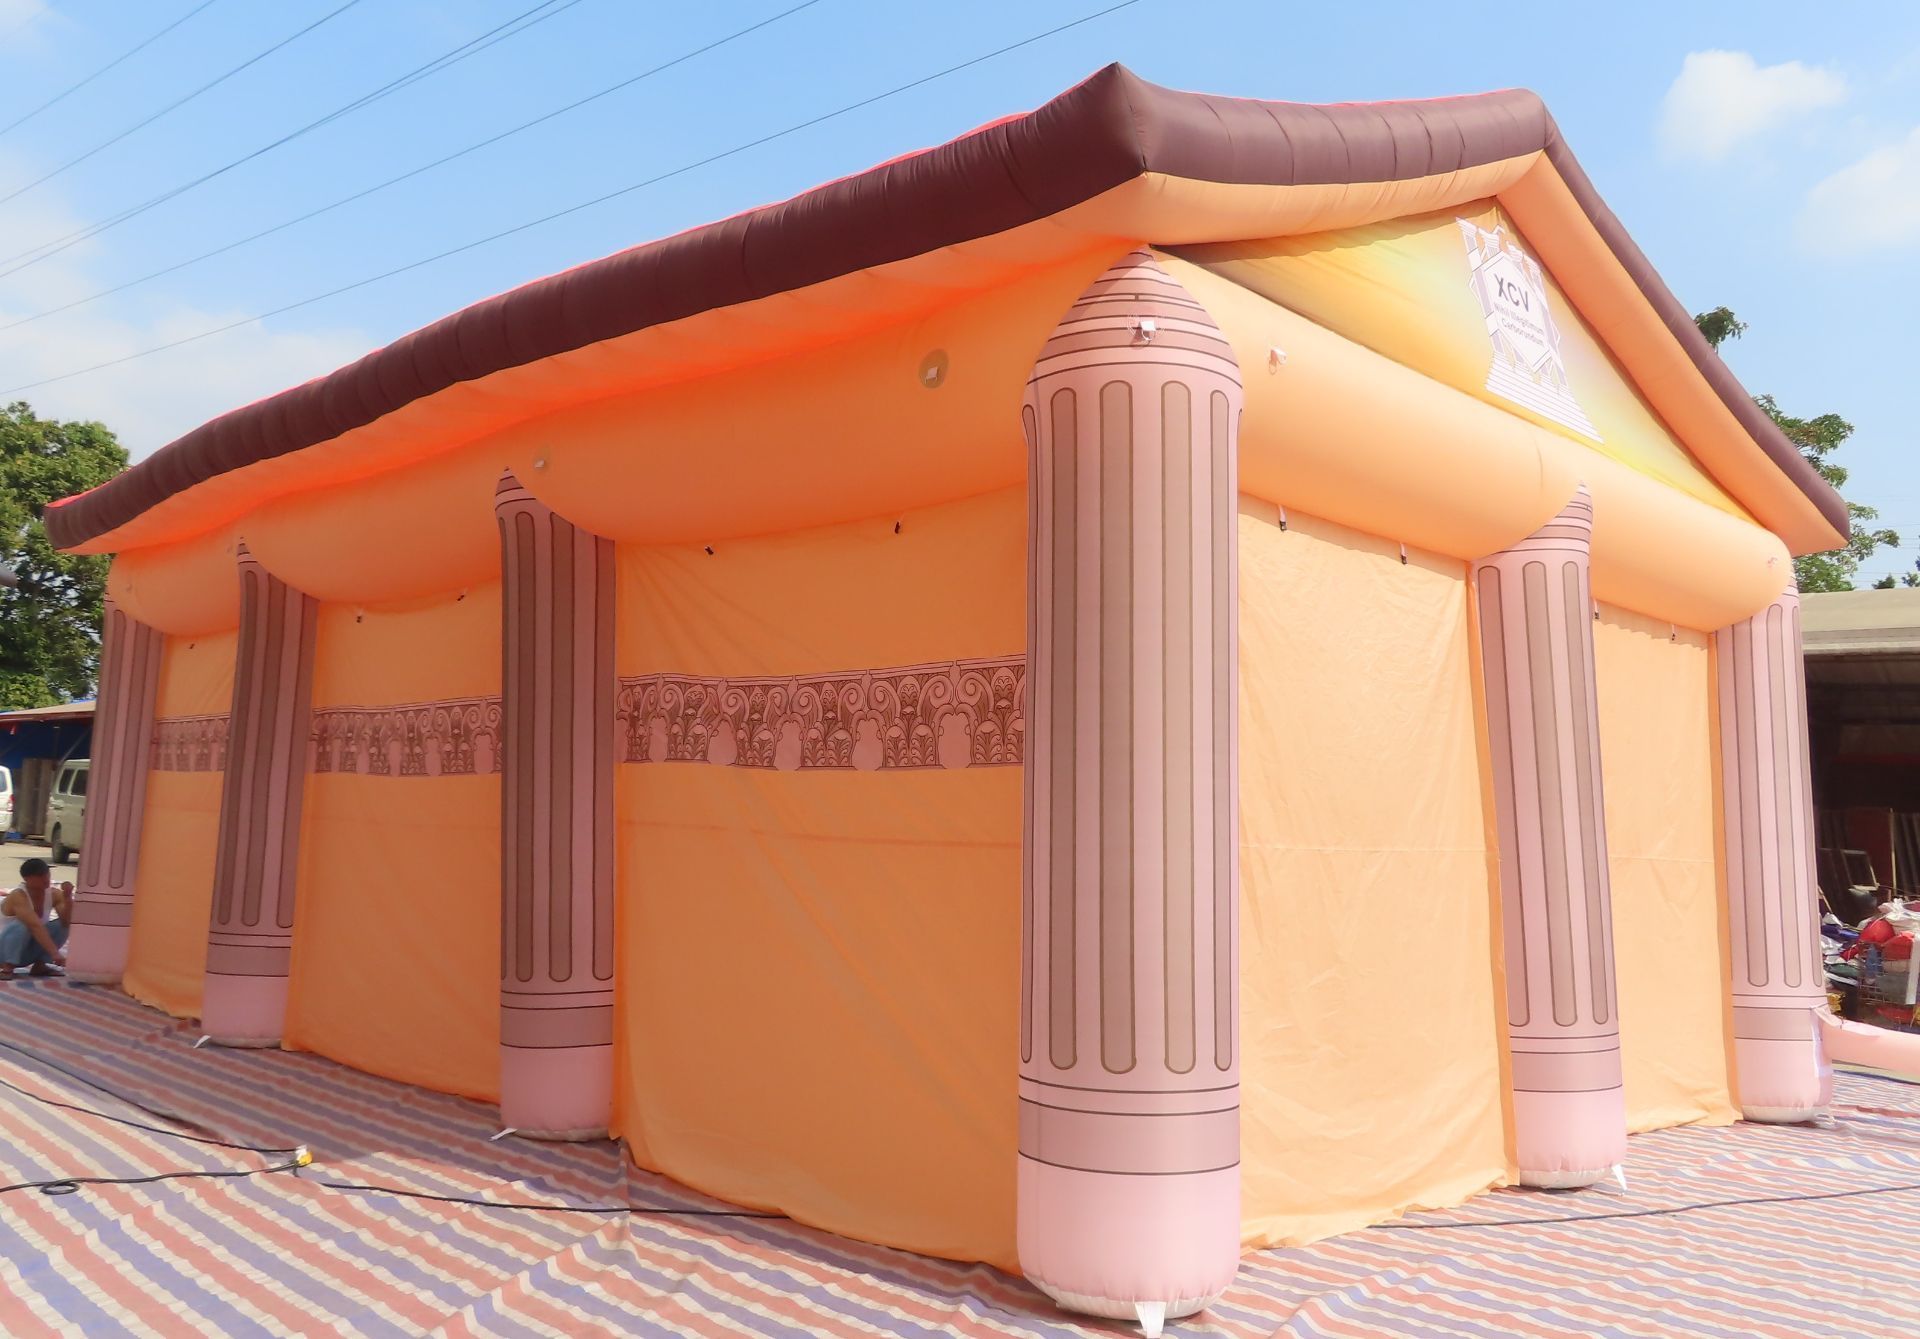 BRAND NEW AND UNUSED ROMAN TEMPLE PARTY TENT, 10m x 6m, 4m TALL, FOR EVENTS - WEDDINGS, BIRTHDAYS - Image 2 of 6